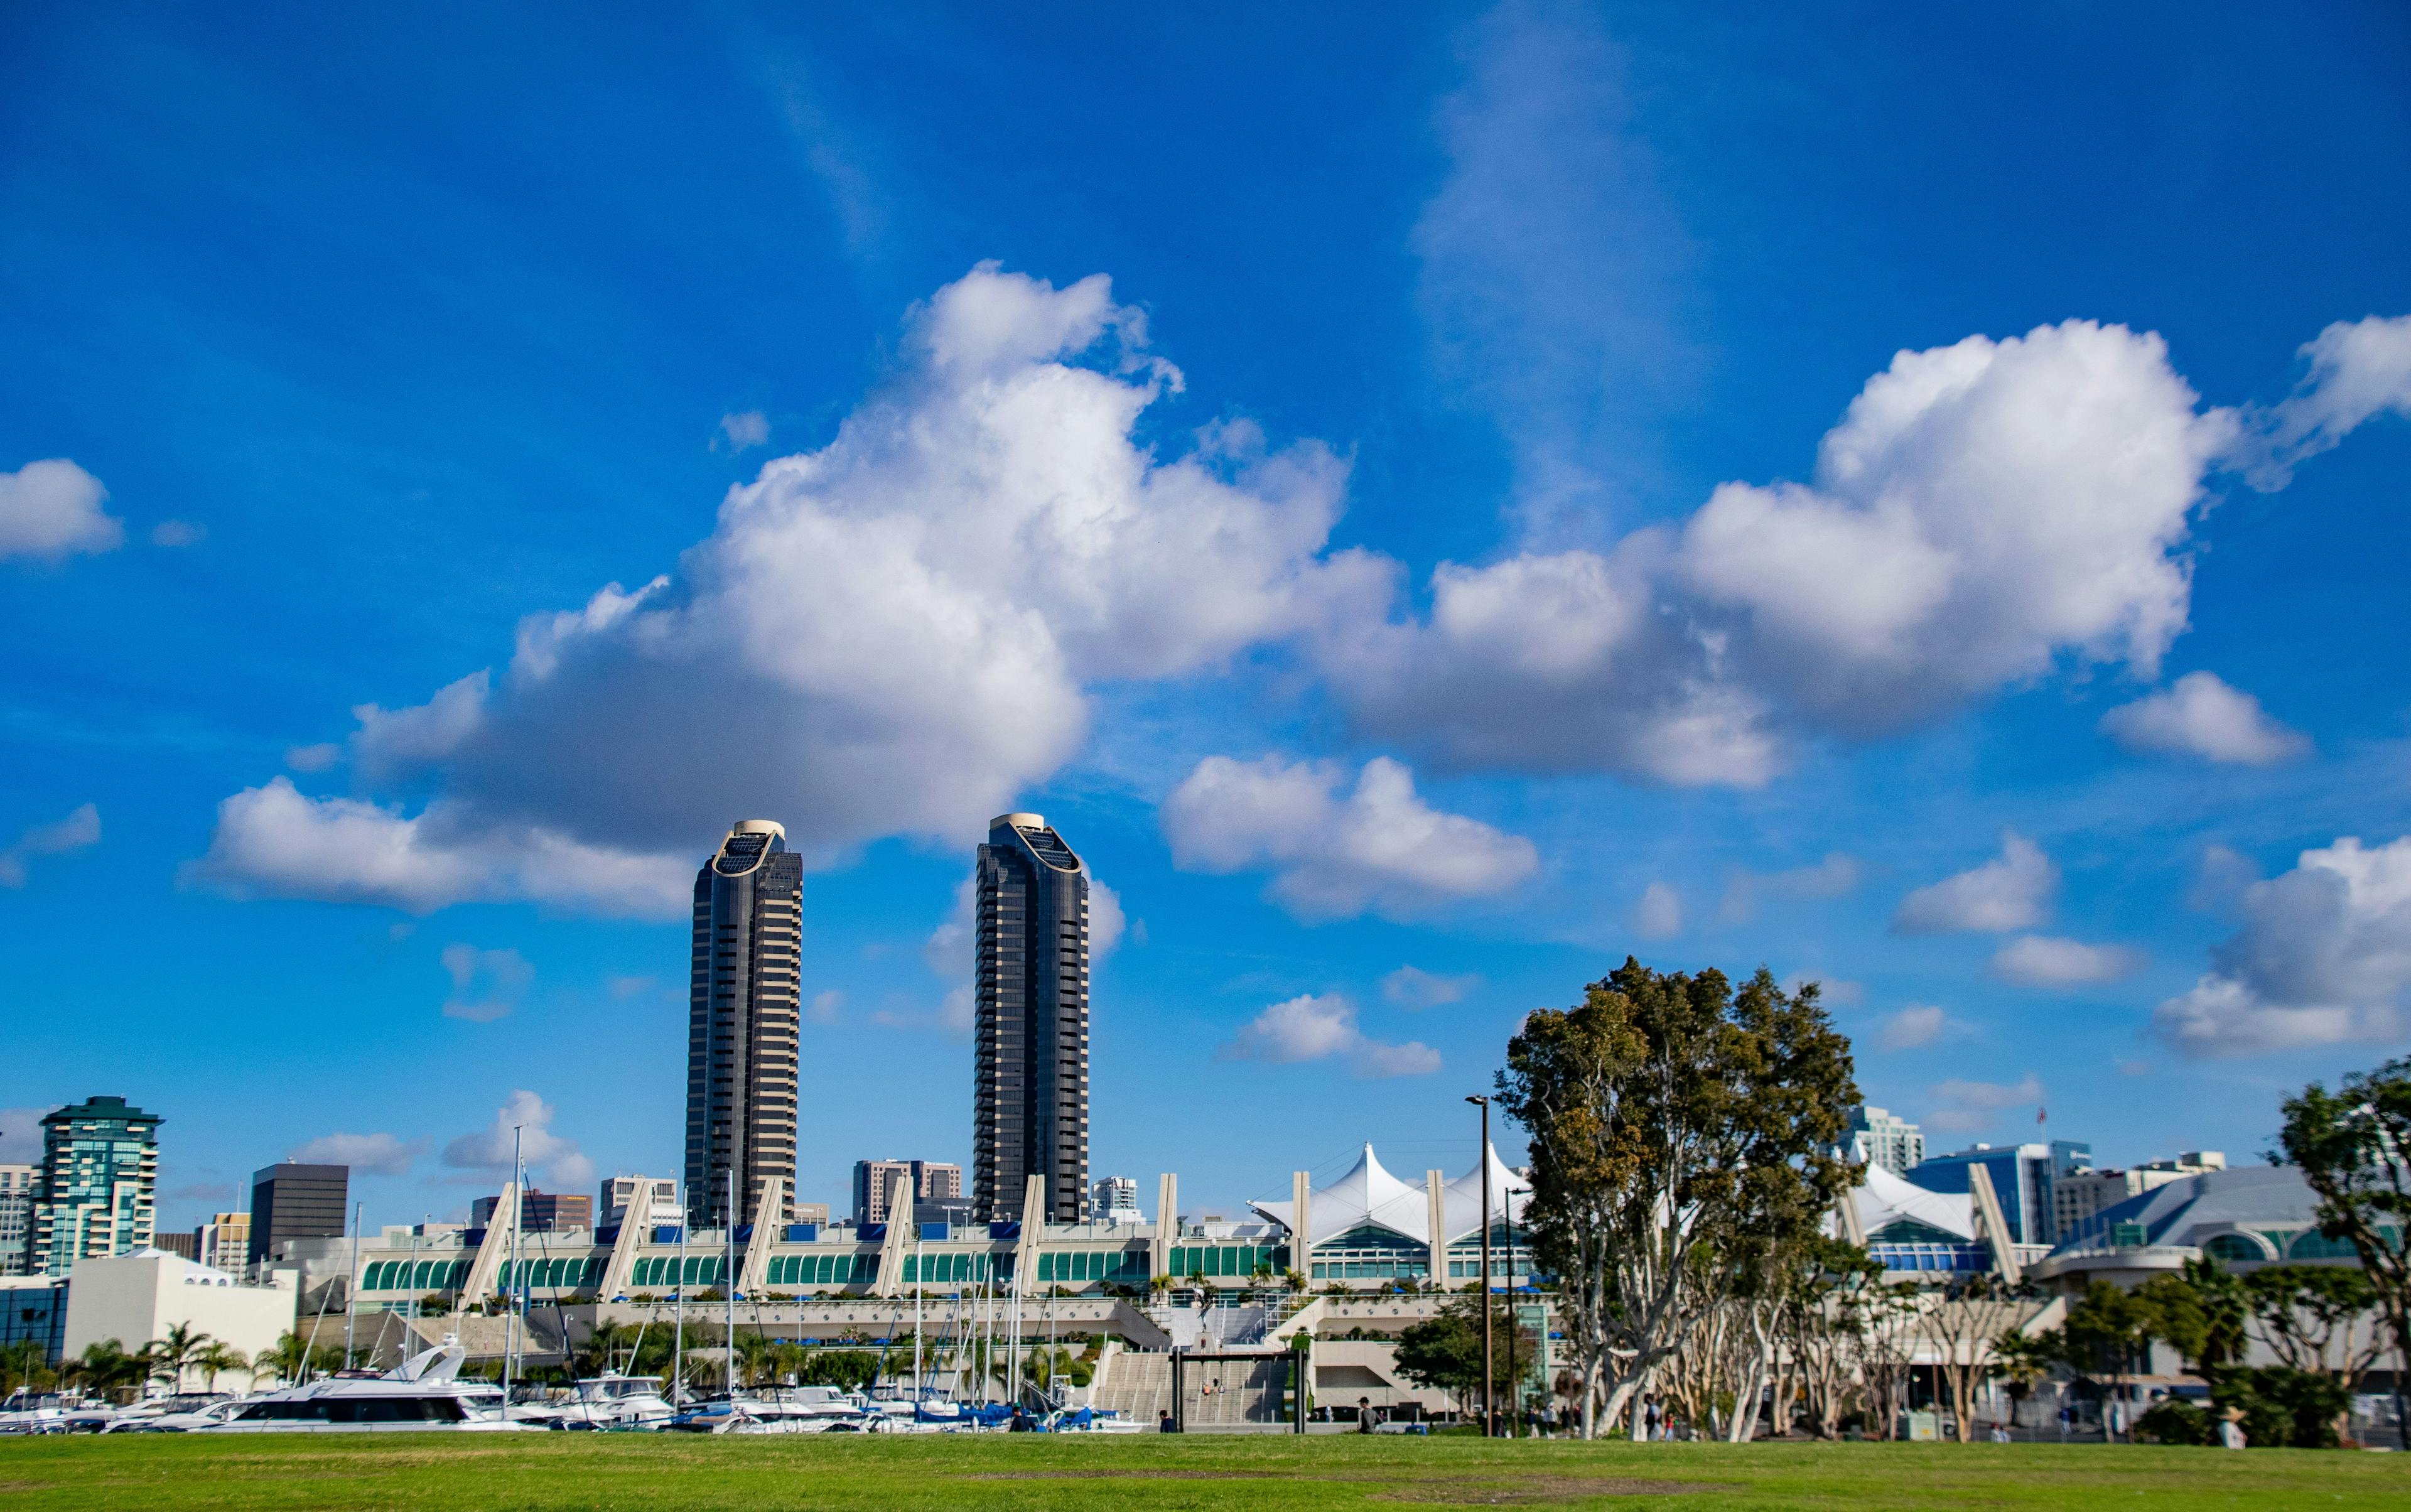 Harrow will host several launch events at the 2023 American Society of Cataract and Refractive Surgery annual meeting being held May 5‑8, 2023, in San Diego, California. (Image courtesy of Adobe Stock)